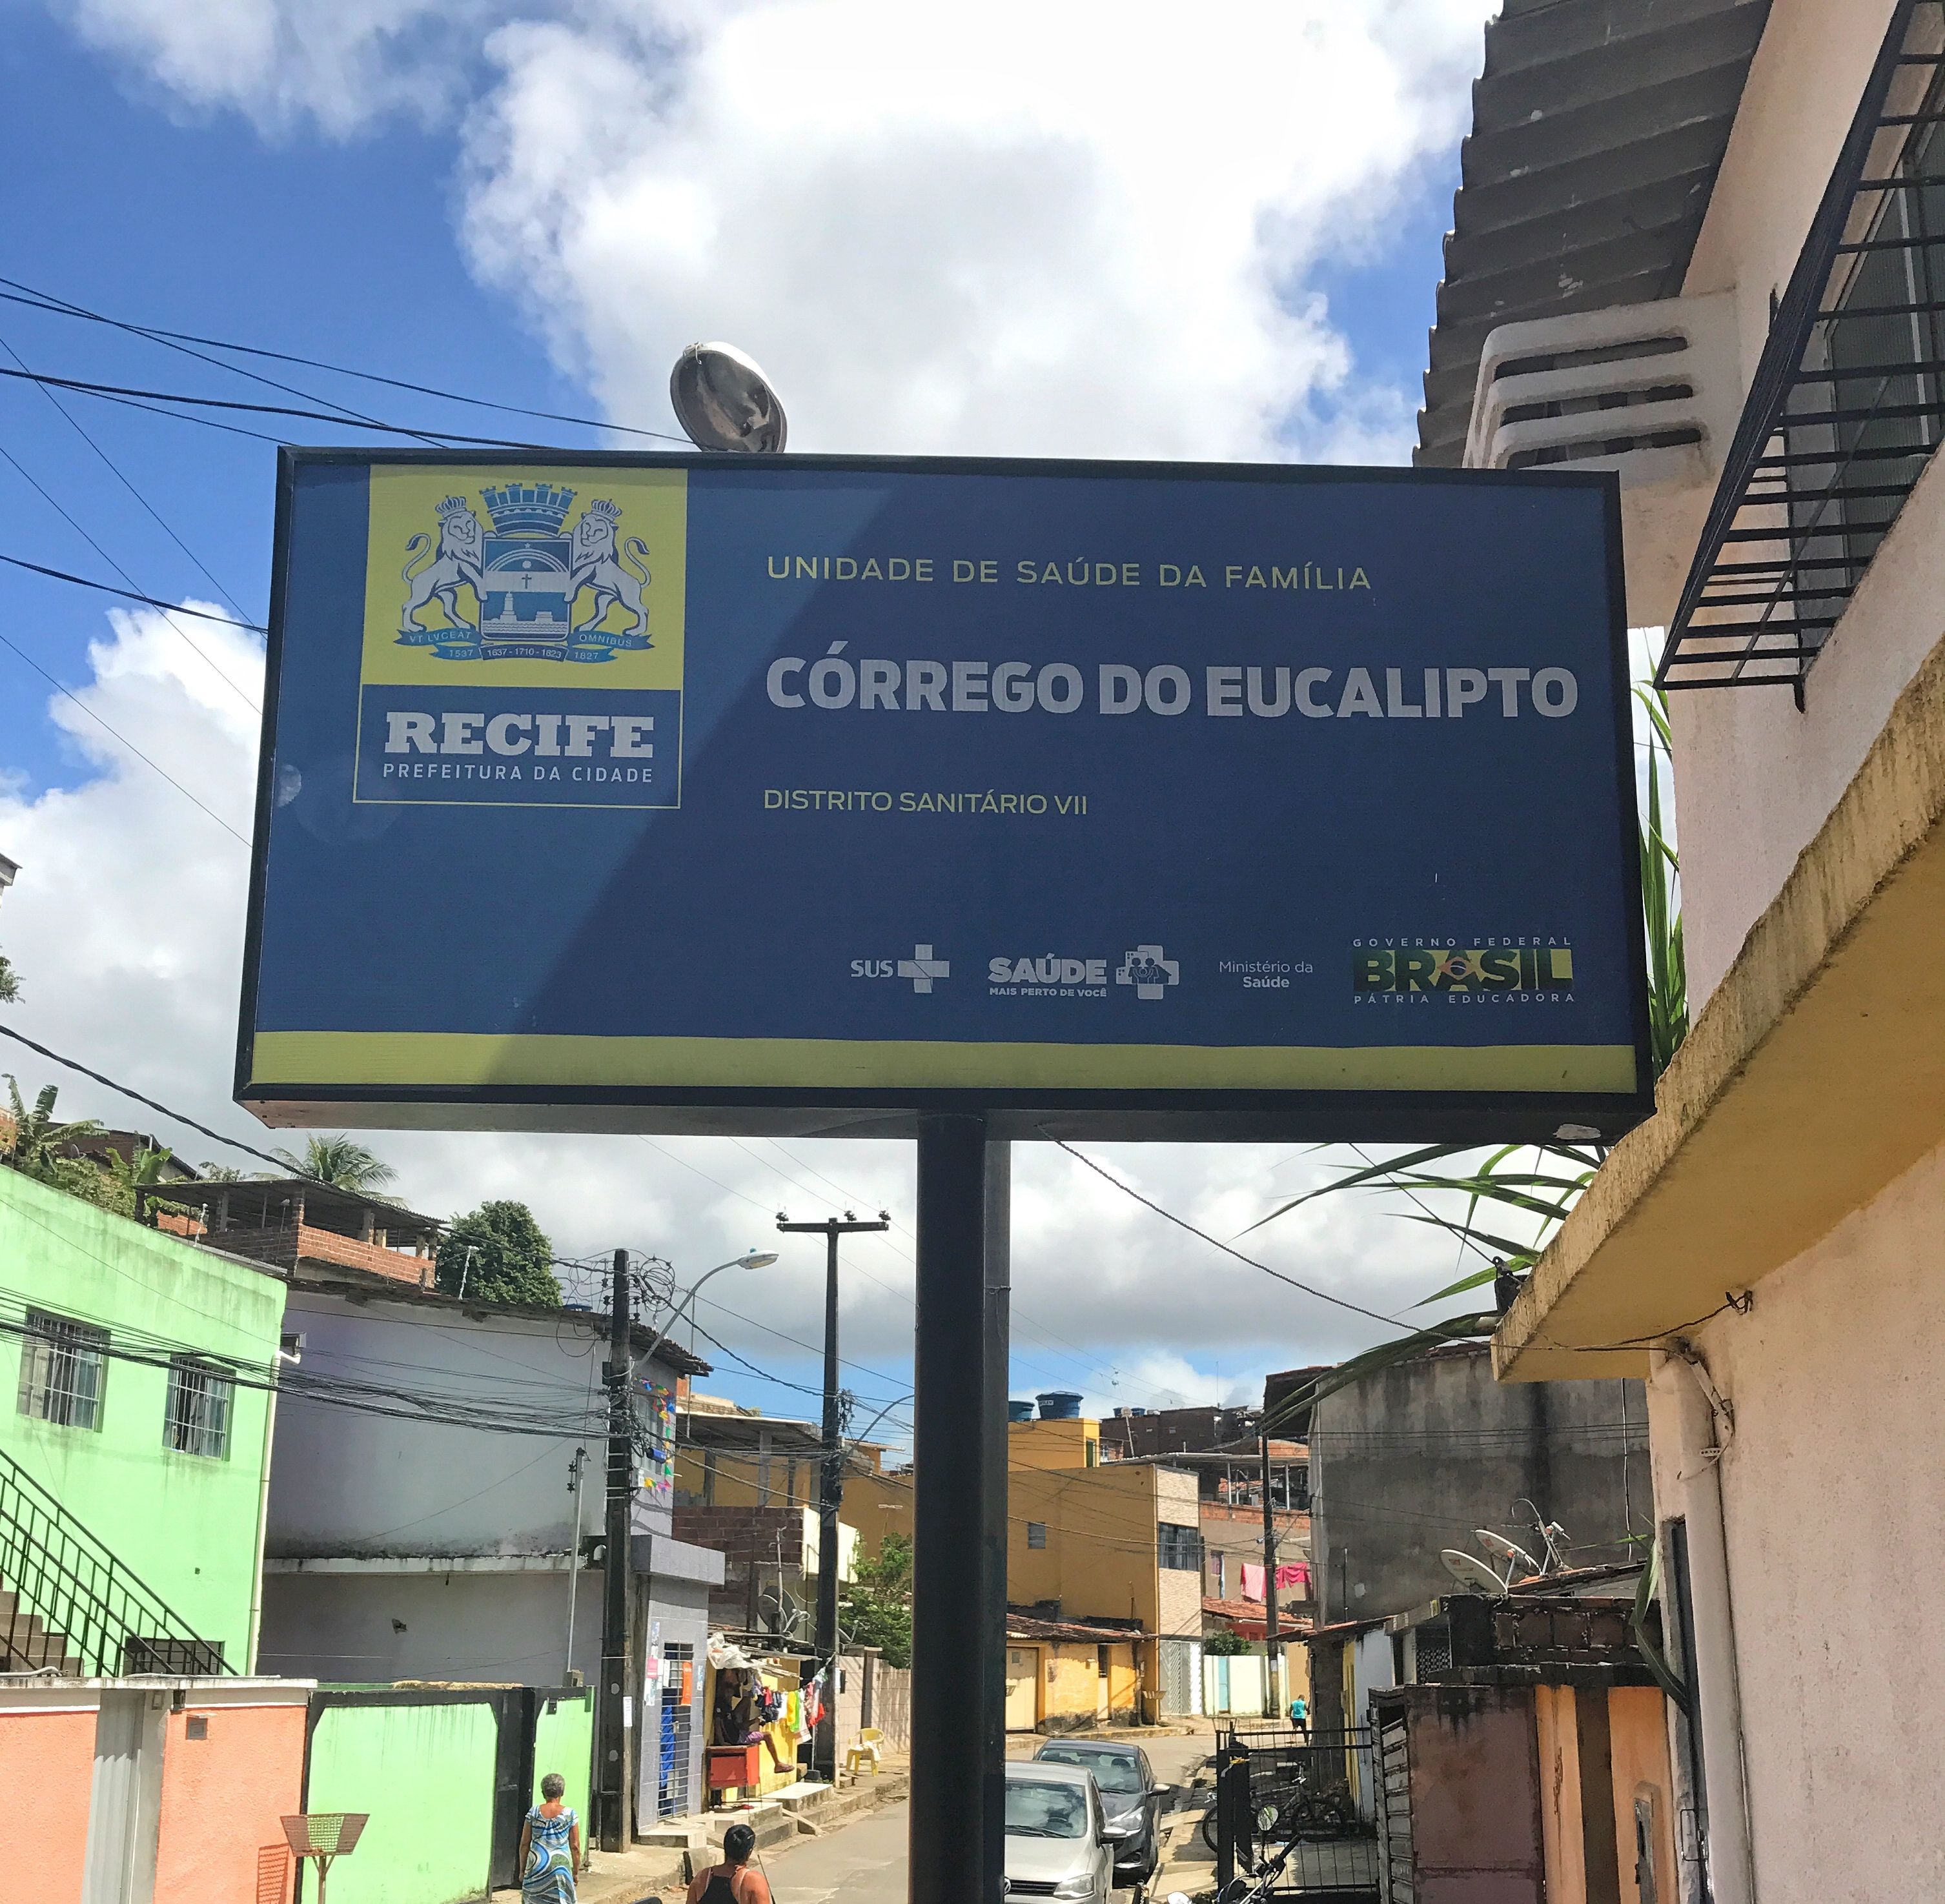 The sign marking the entrance to the Unidade de Saúde da Família (USF) in Córrego do Eucalipto. USFs are the cornerstone of Brazil’s primary healthcare strategy, which is a key component of its free national health system. Image by Poonam Daryani. Brazil, 2017.